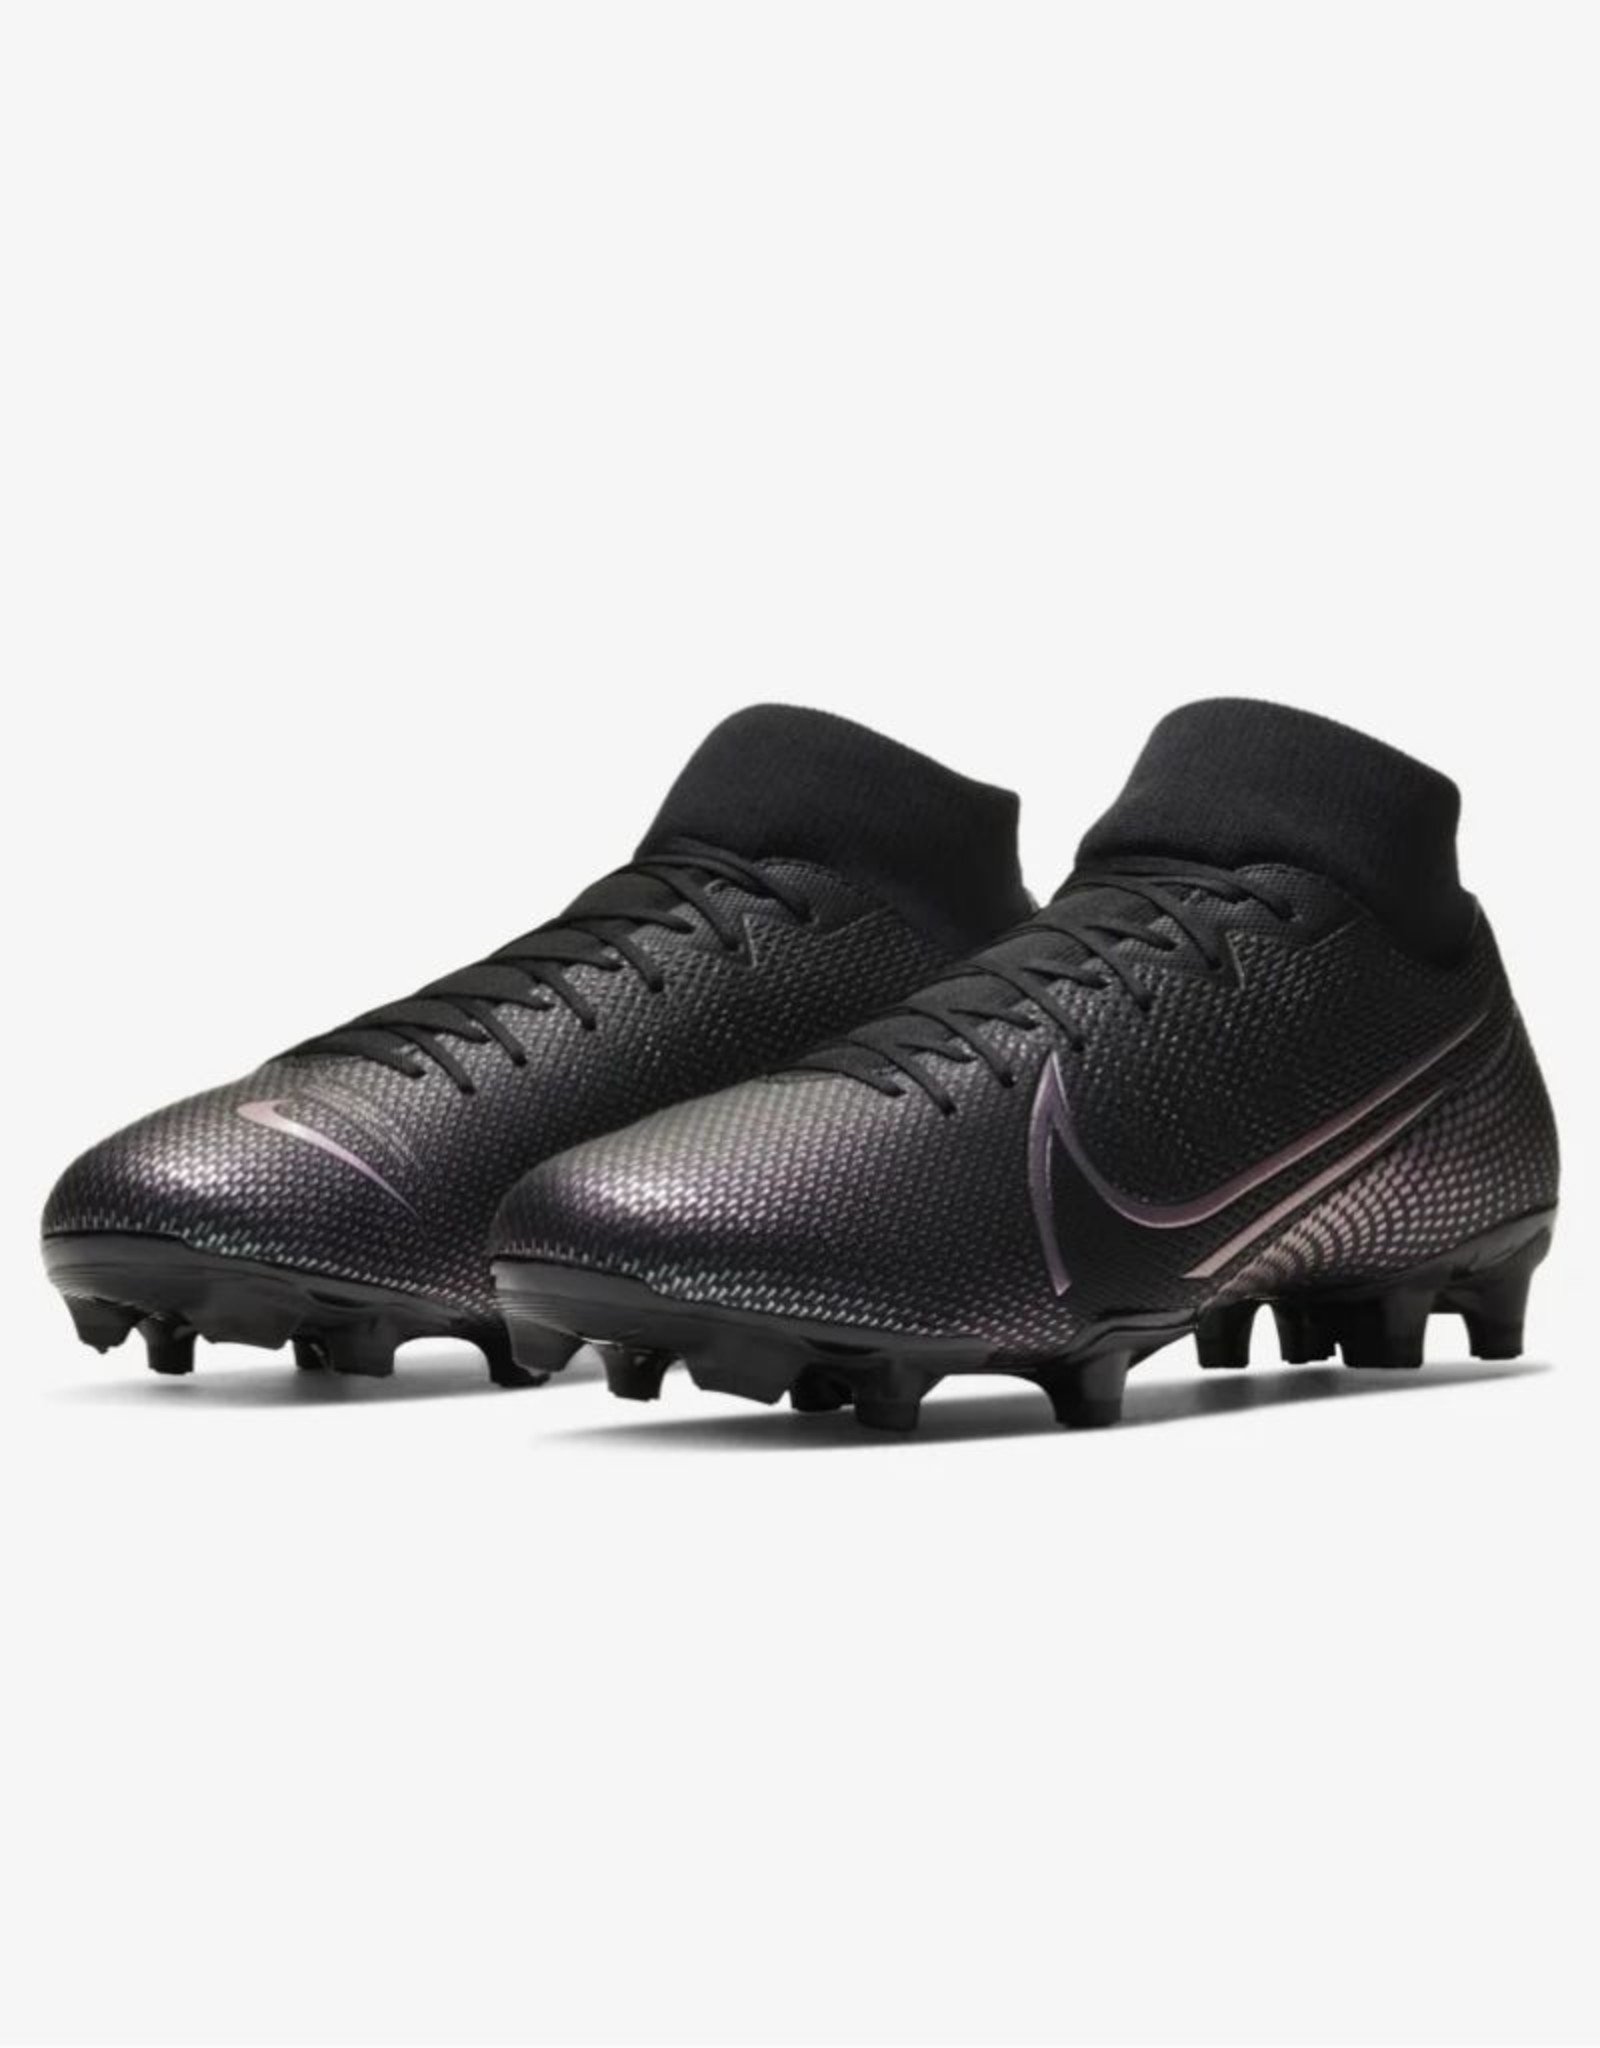 Nike jr. Superfly 6 Academy MG Game Over Football boots.